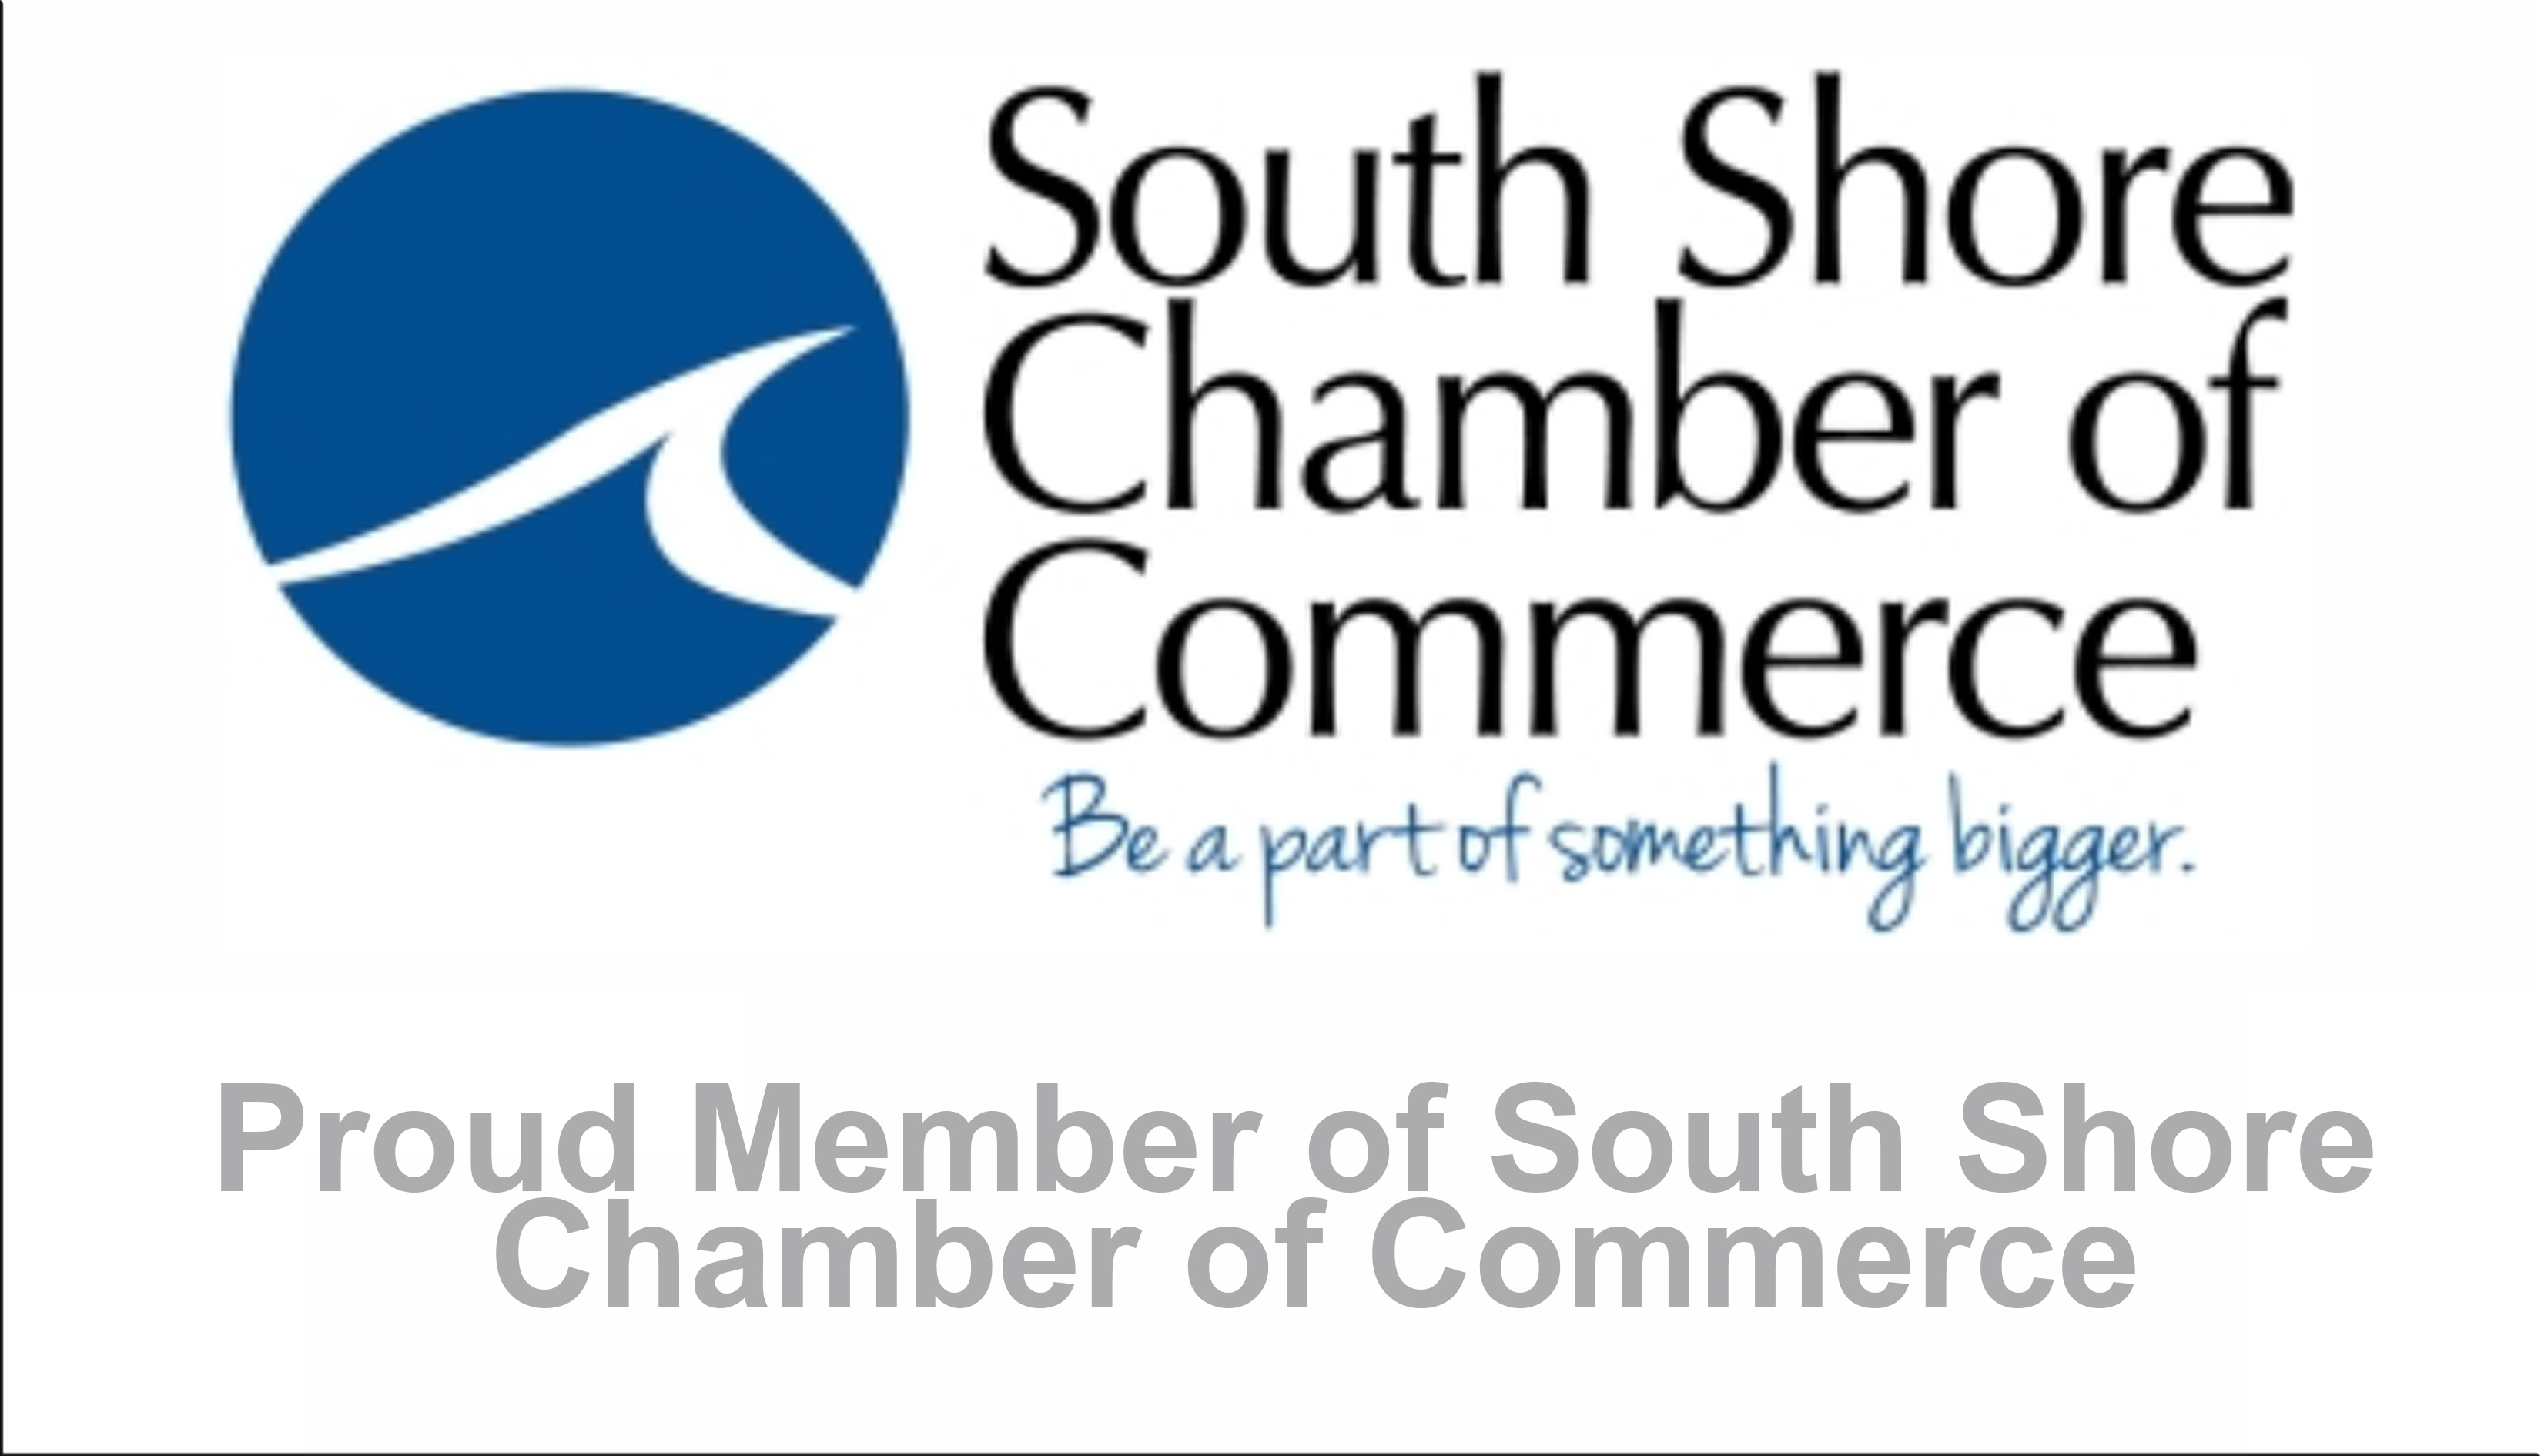 Proud Member of South Shore Chamber of Commerce